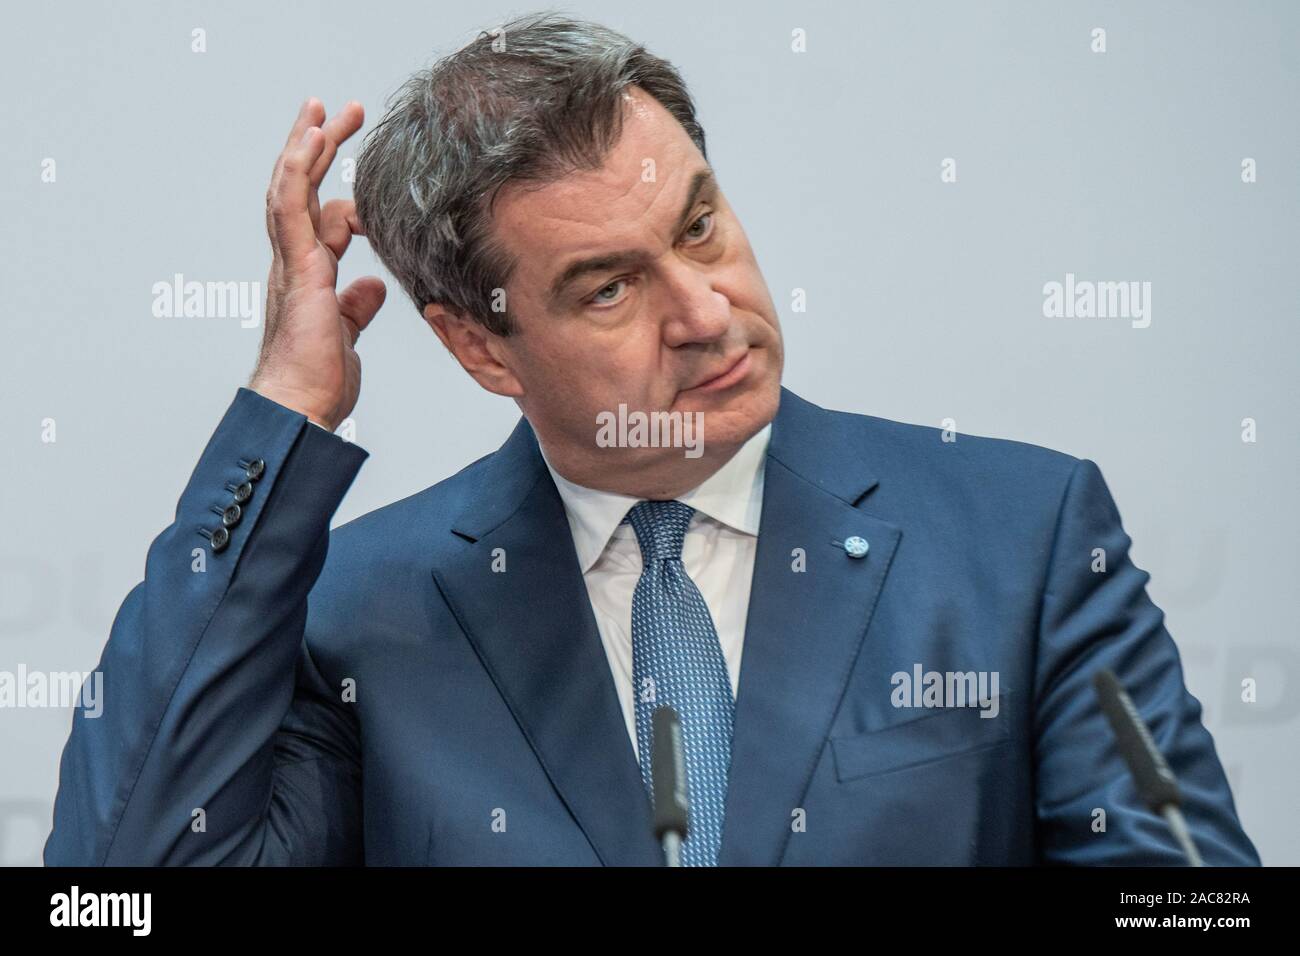 Markus Söder speaking at an election event in May 2019 in Berlin. This photo shows him speaking about the CDU election results as they came in. Stock Photo